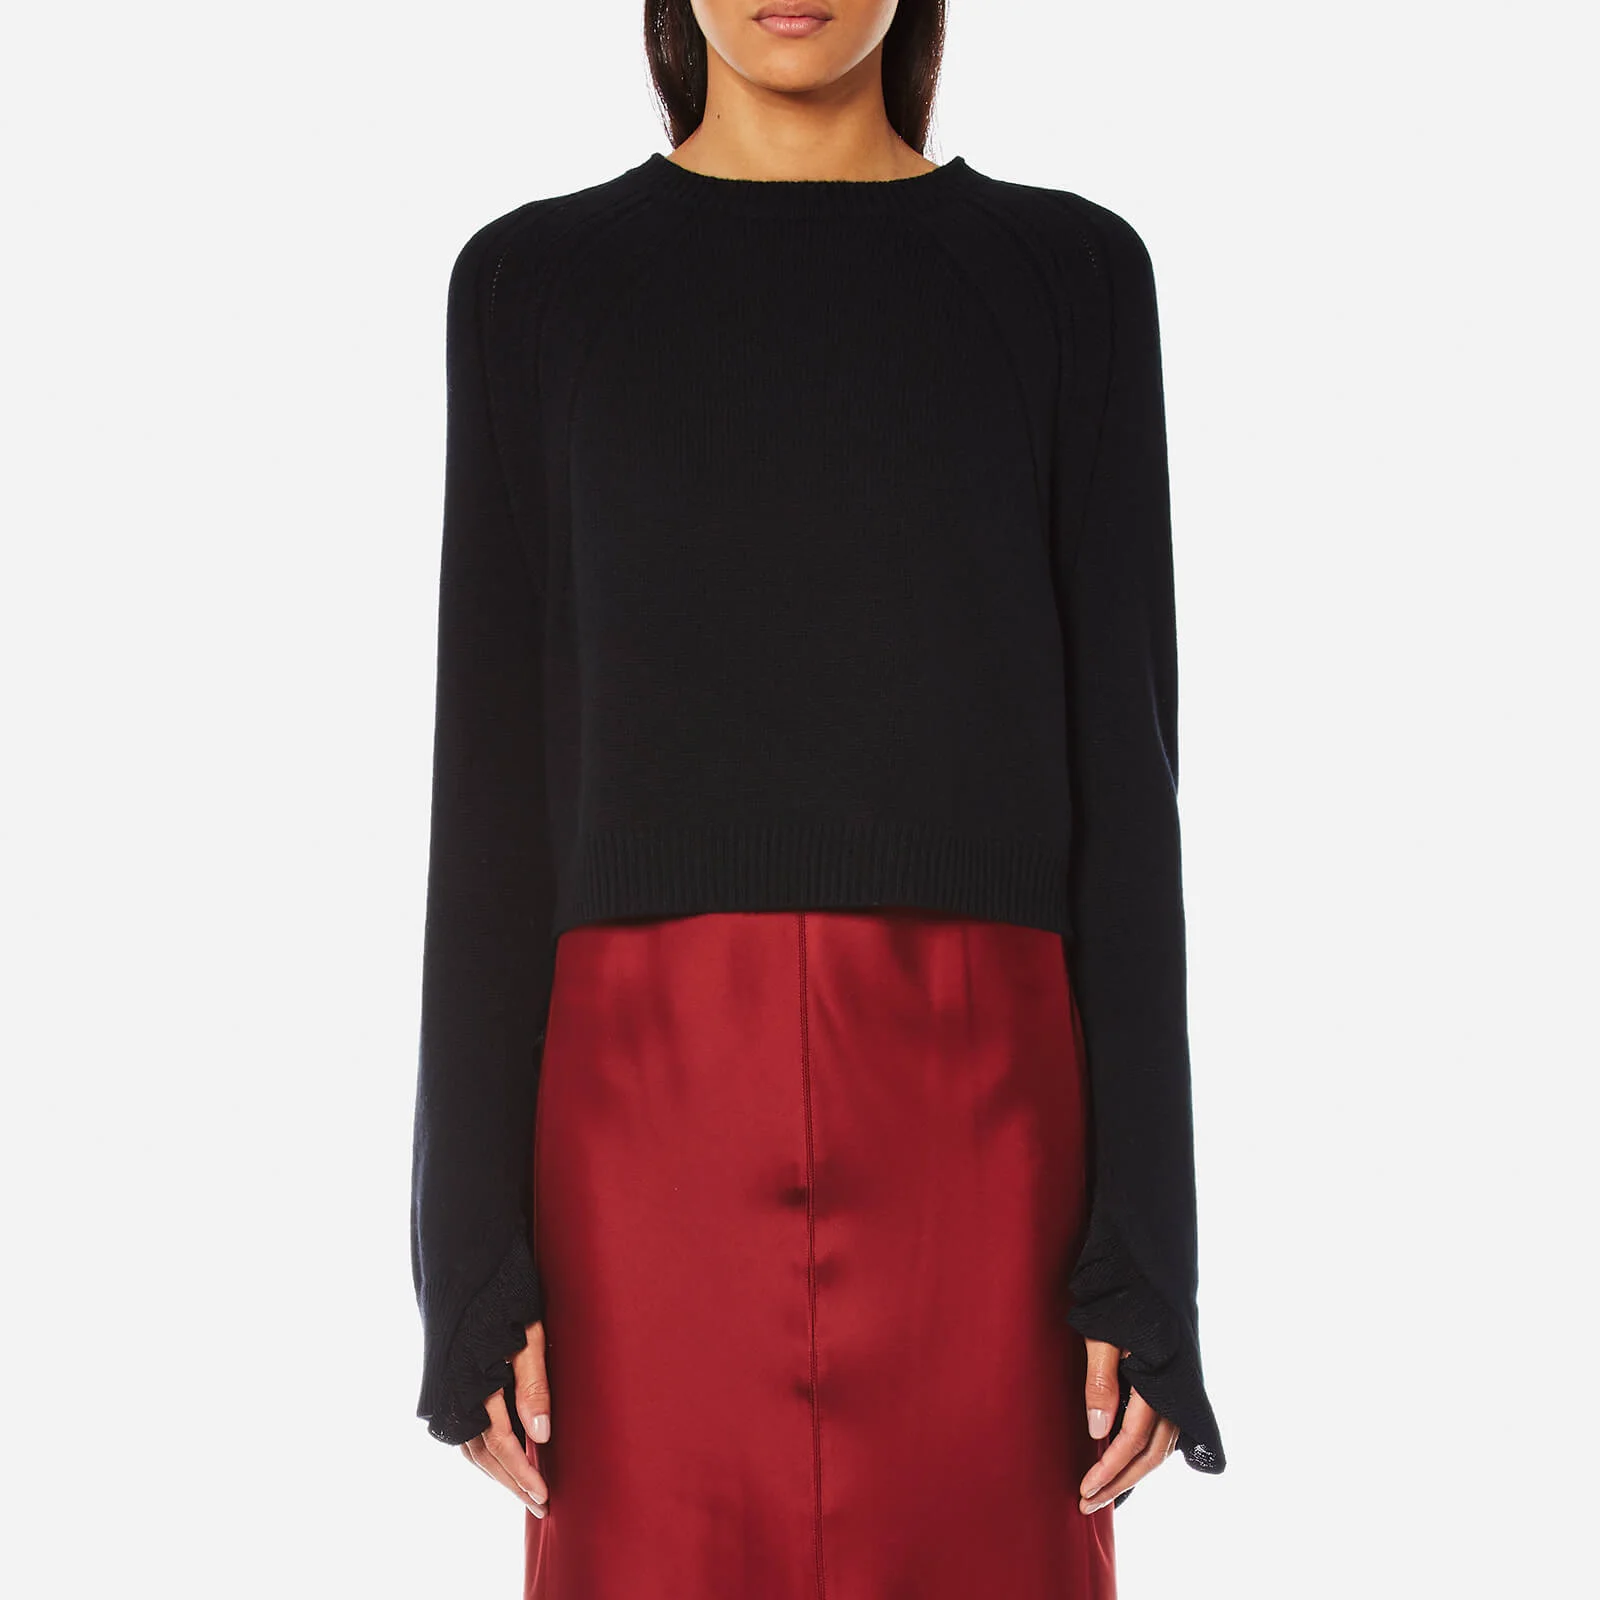 Helmut Lang Women's Cropped Ruffle Pullover Jumper - Black Image 1